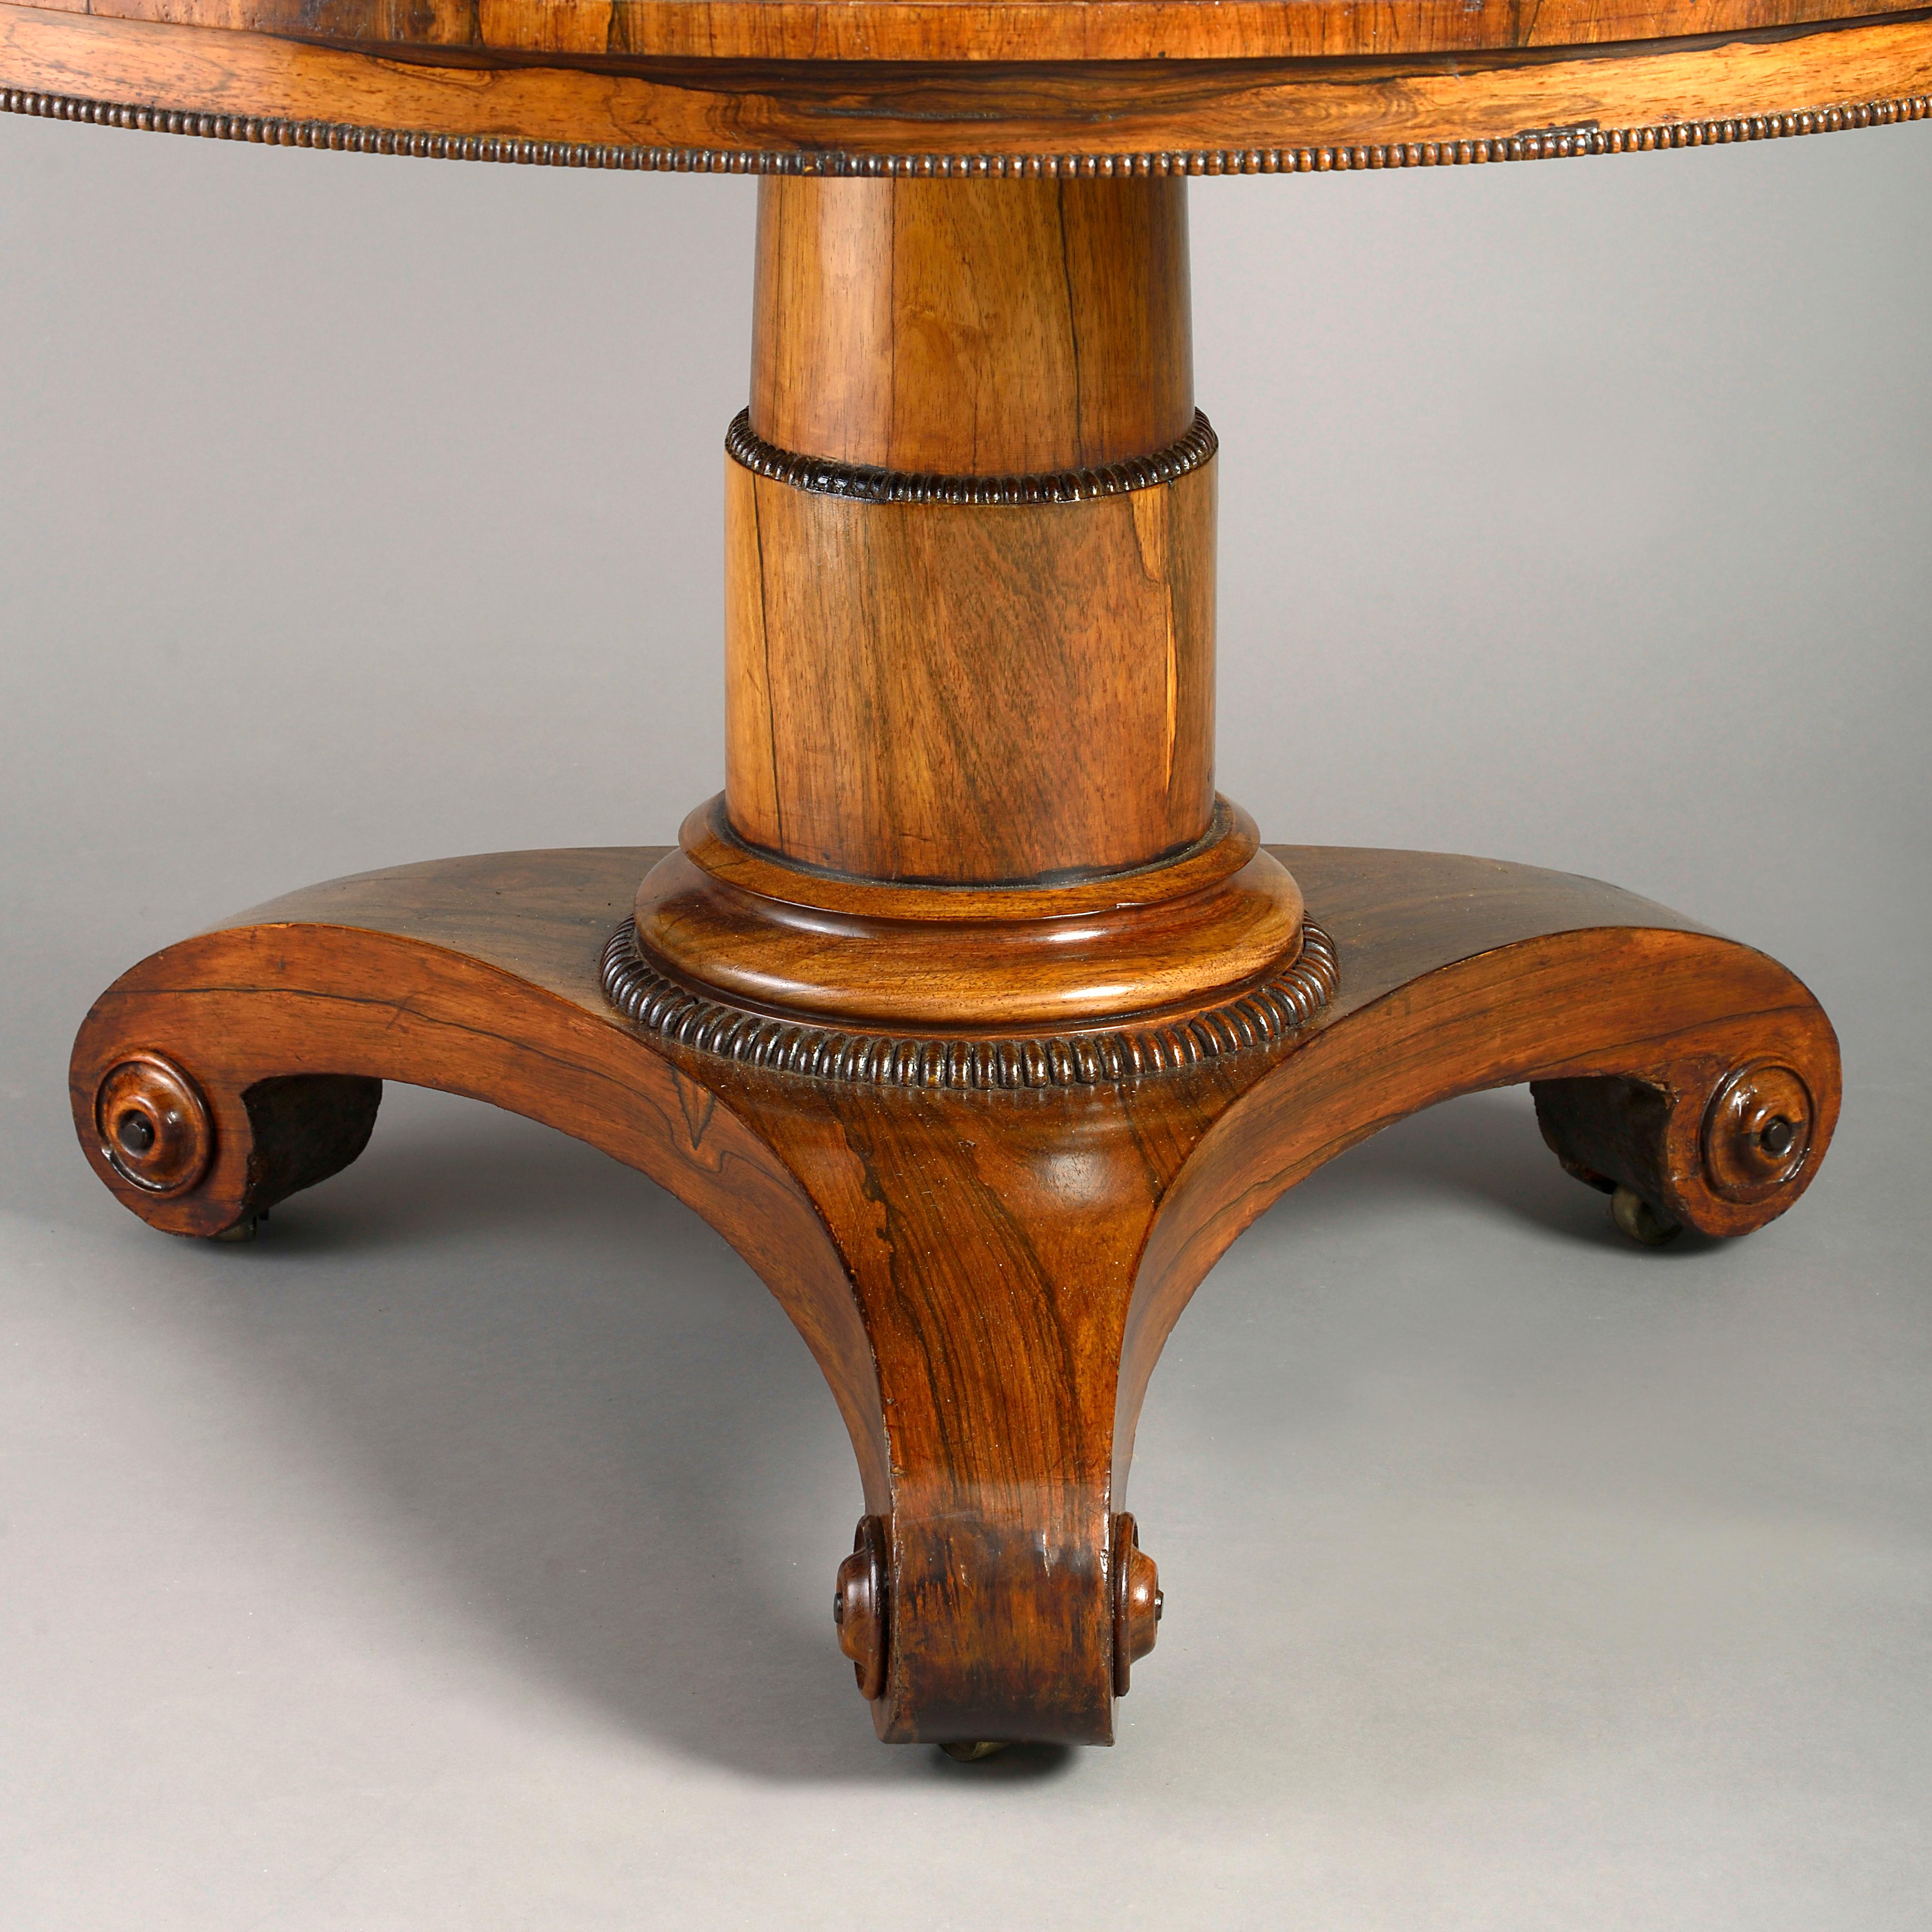 Hand-Crafted Early 19th Century Regency Period Rosewood Centre Table